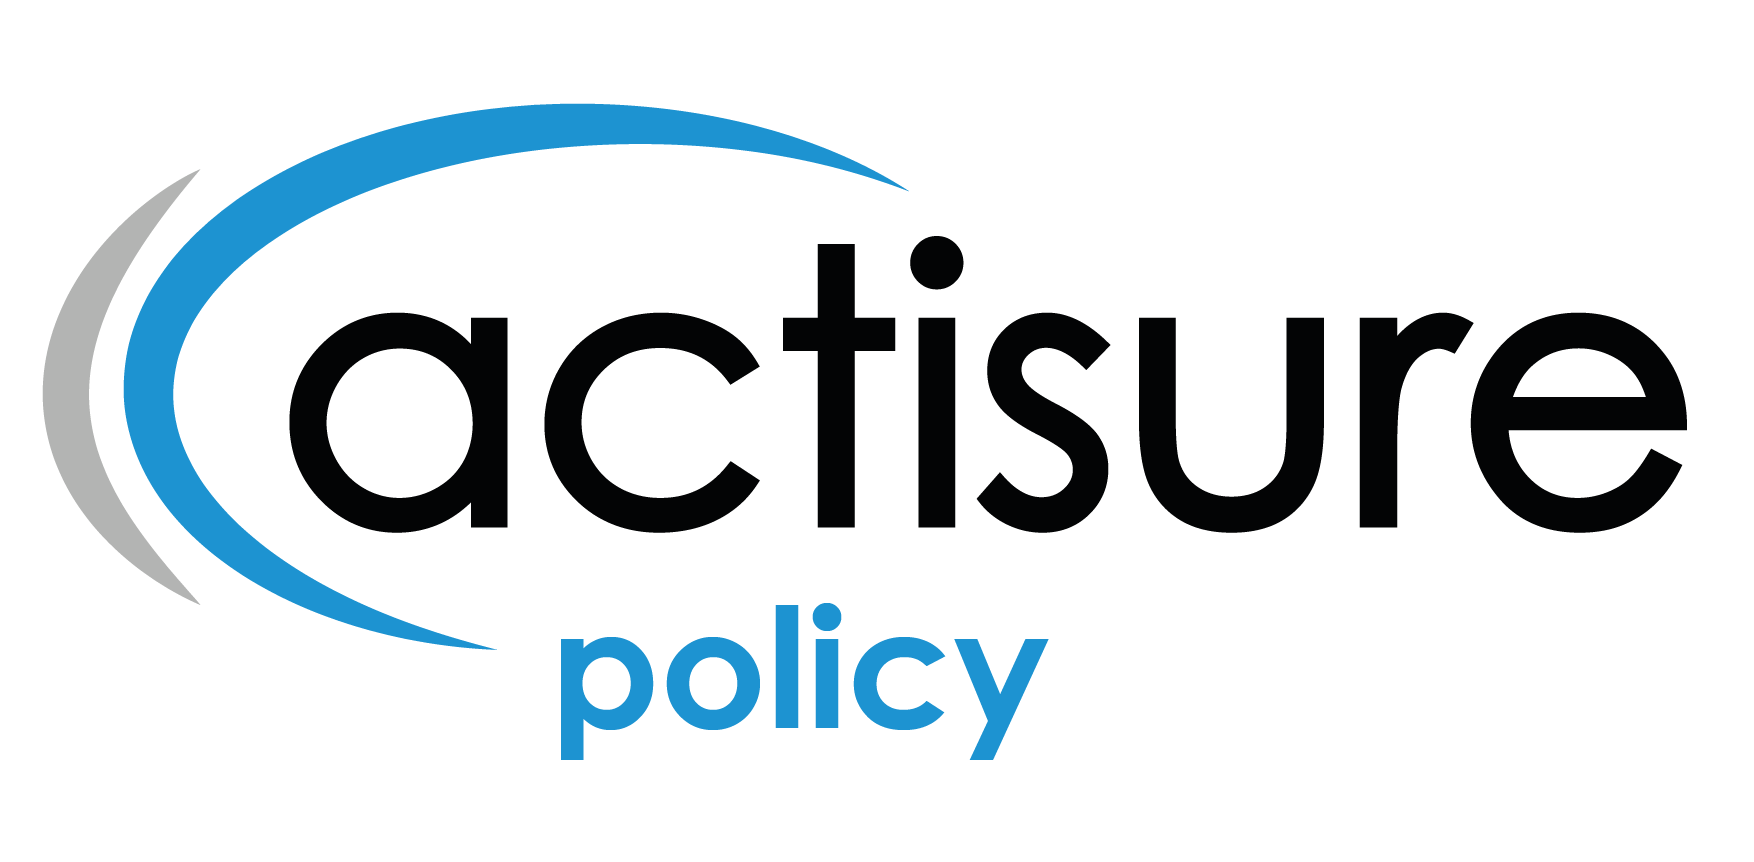 Actisure policy, module of health insurance core system